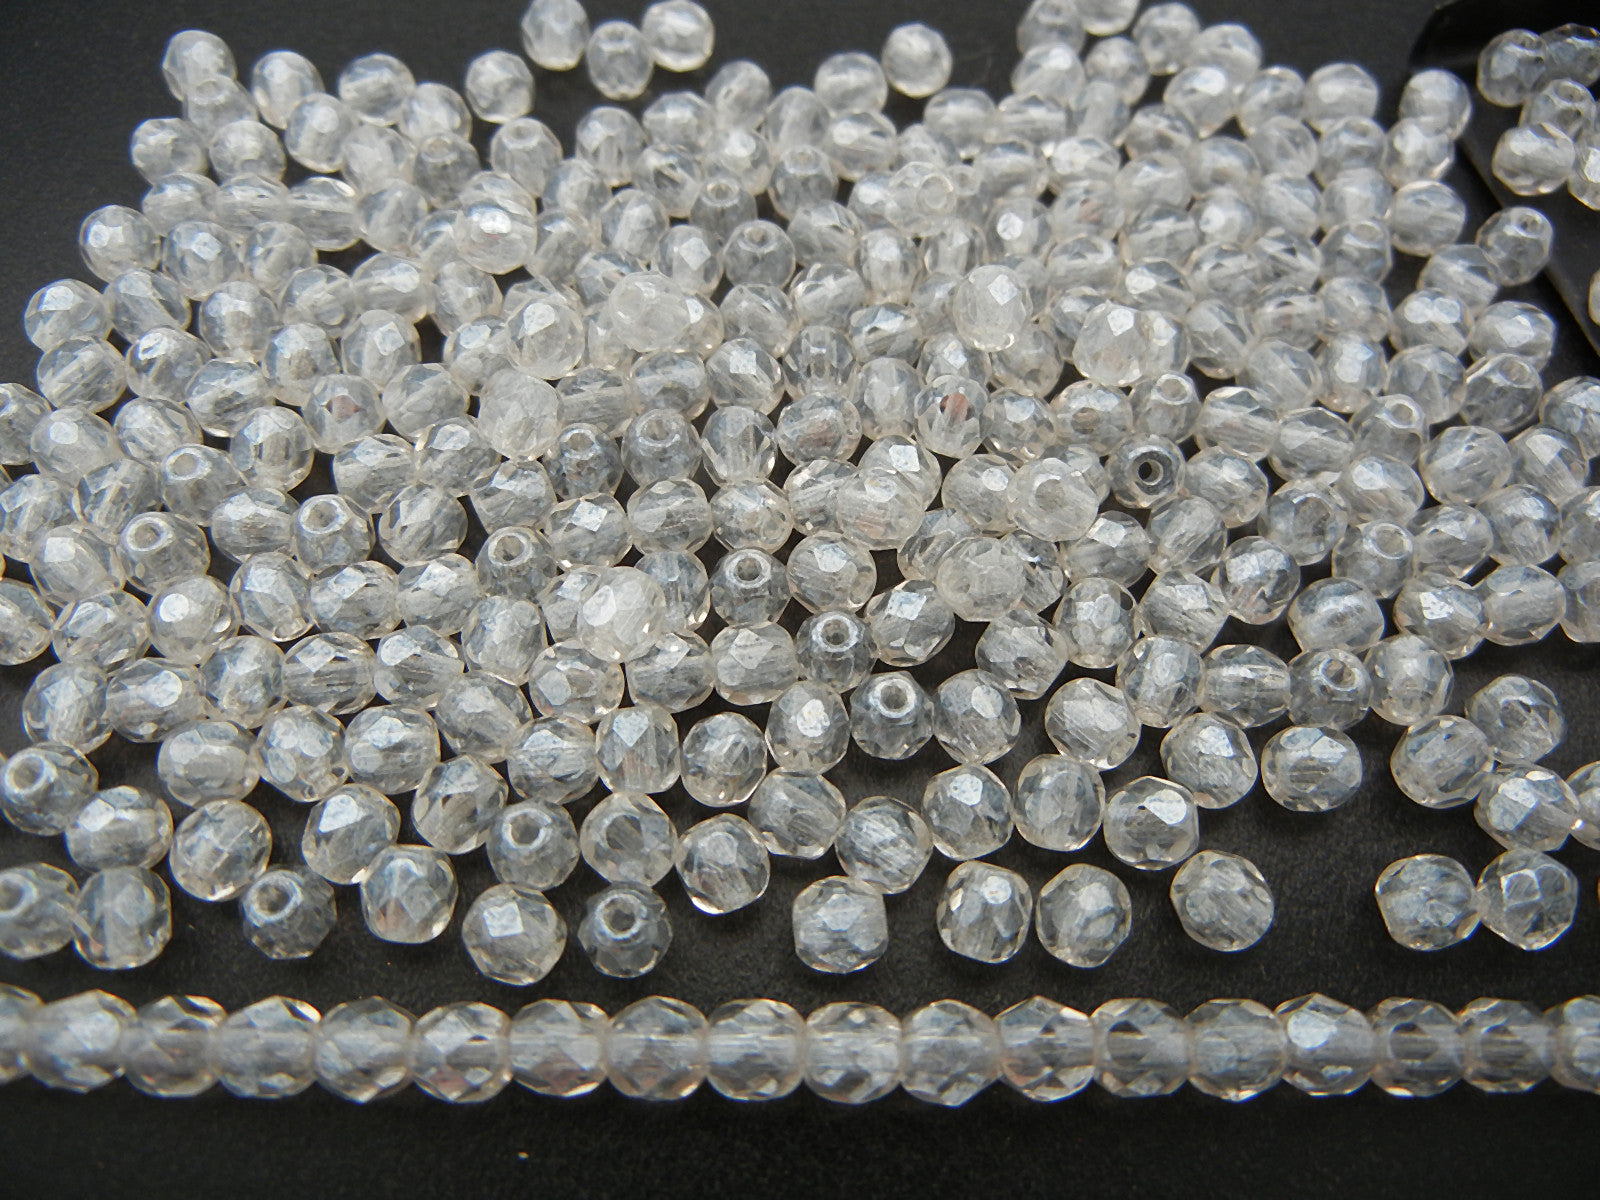 10 Beads - 8mm Faceted Clear White Glass Round Crystal Beads, Clear Glass  Crystal, Clear Round Beads, Clear White Crystal Beads